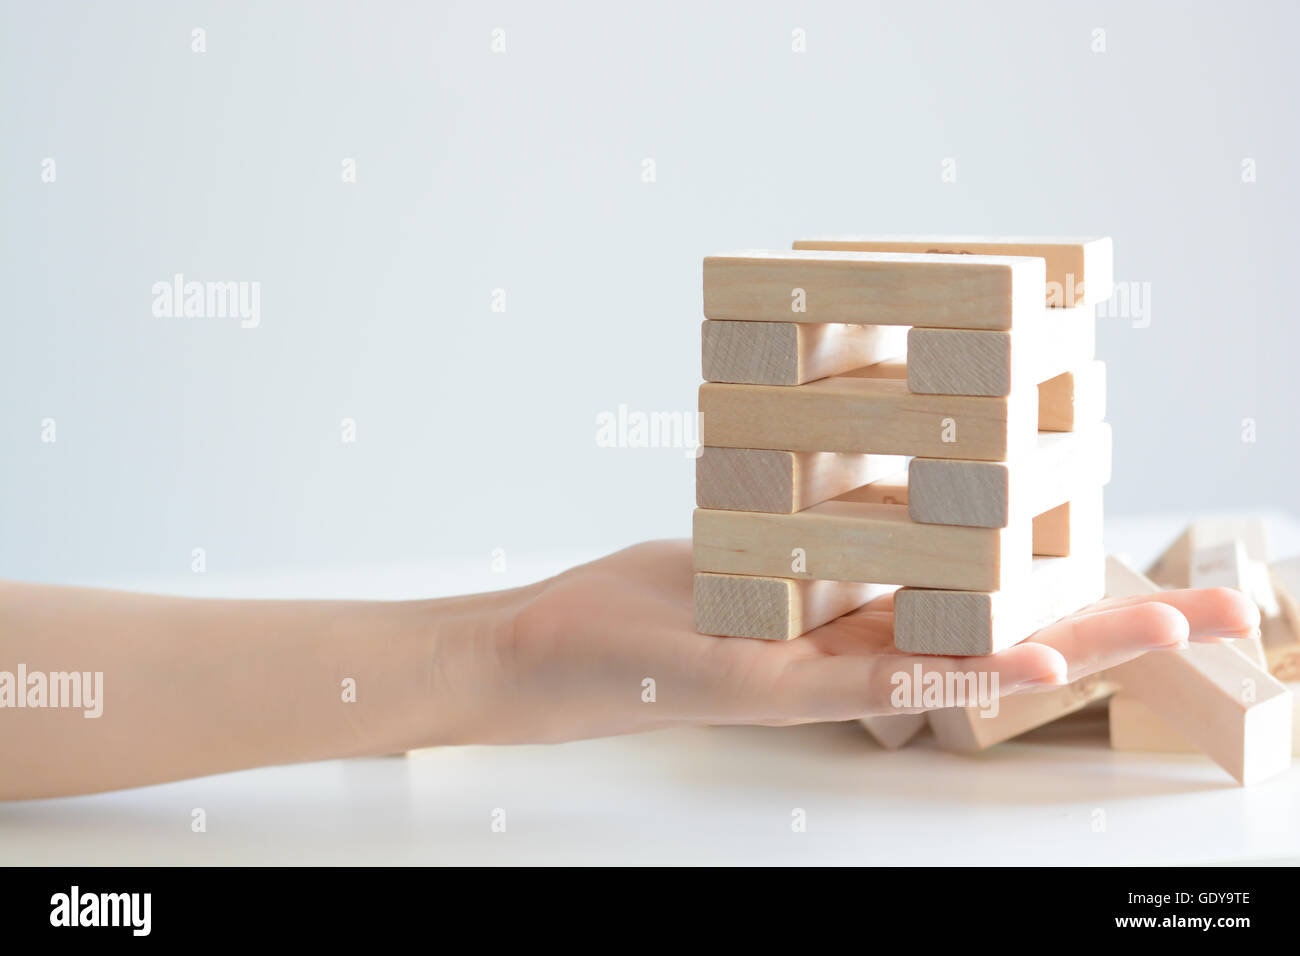 Security or insurance concept with hands protecting construction made from wooden blocks Stock Photo